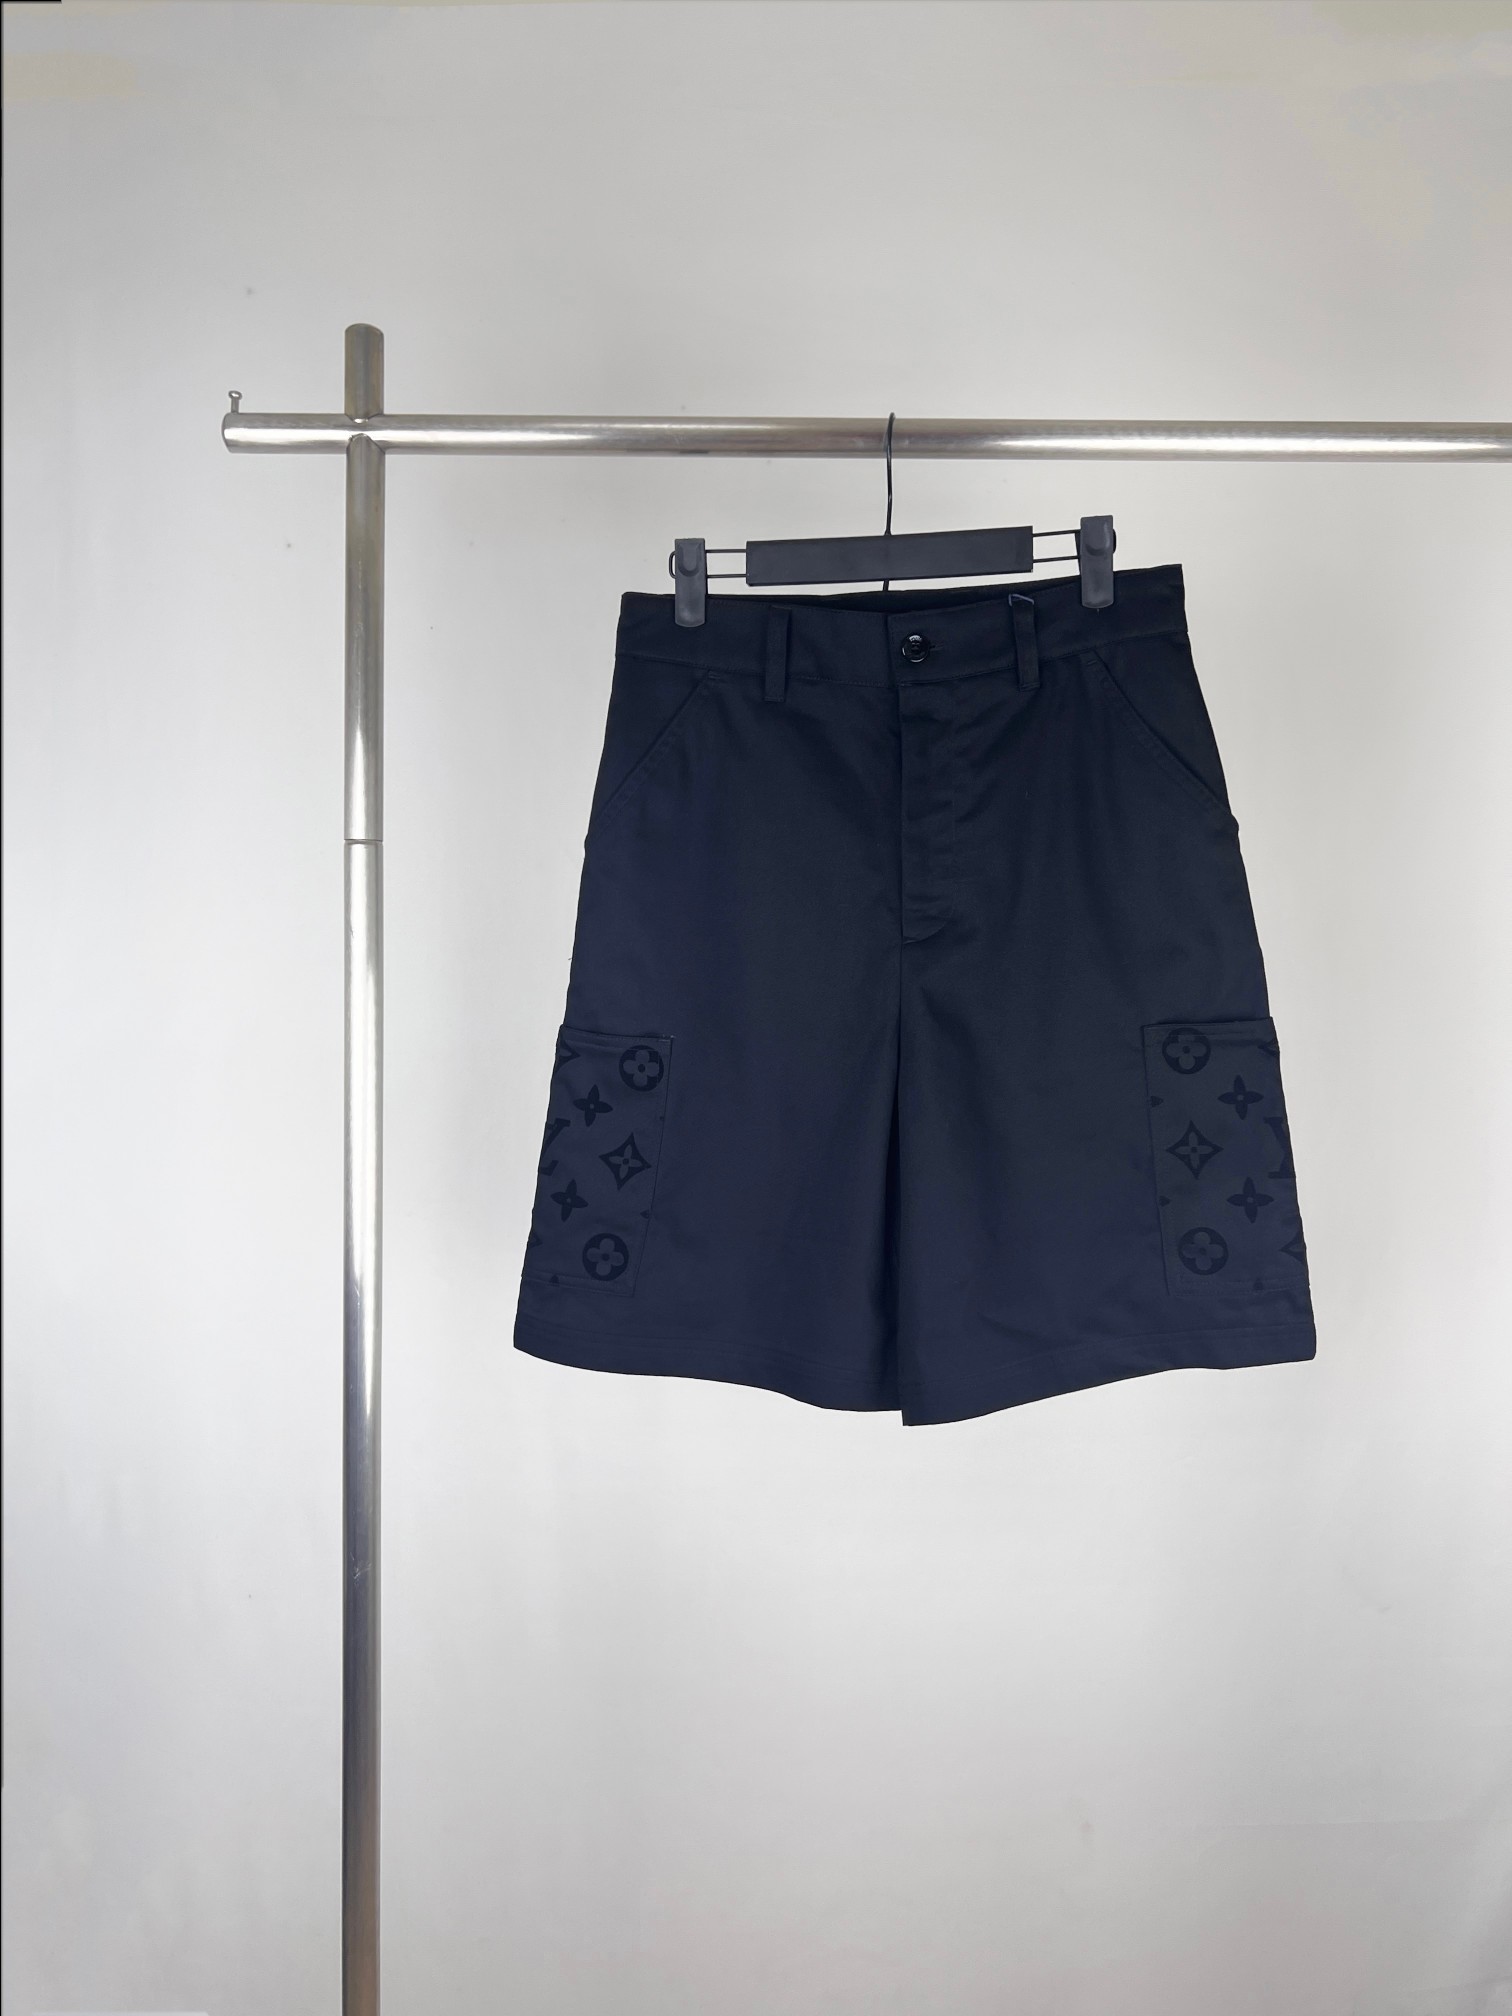 From China
 Louis Vuitton Clothing Shorts Buy best quality Replica